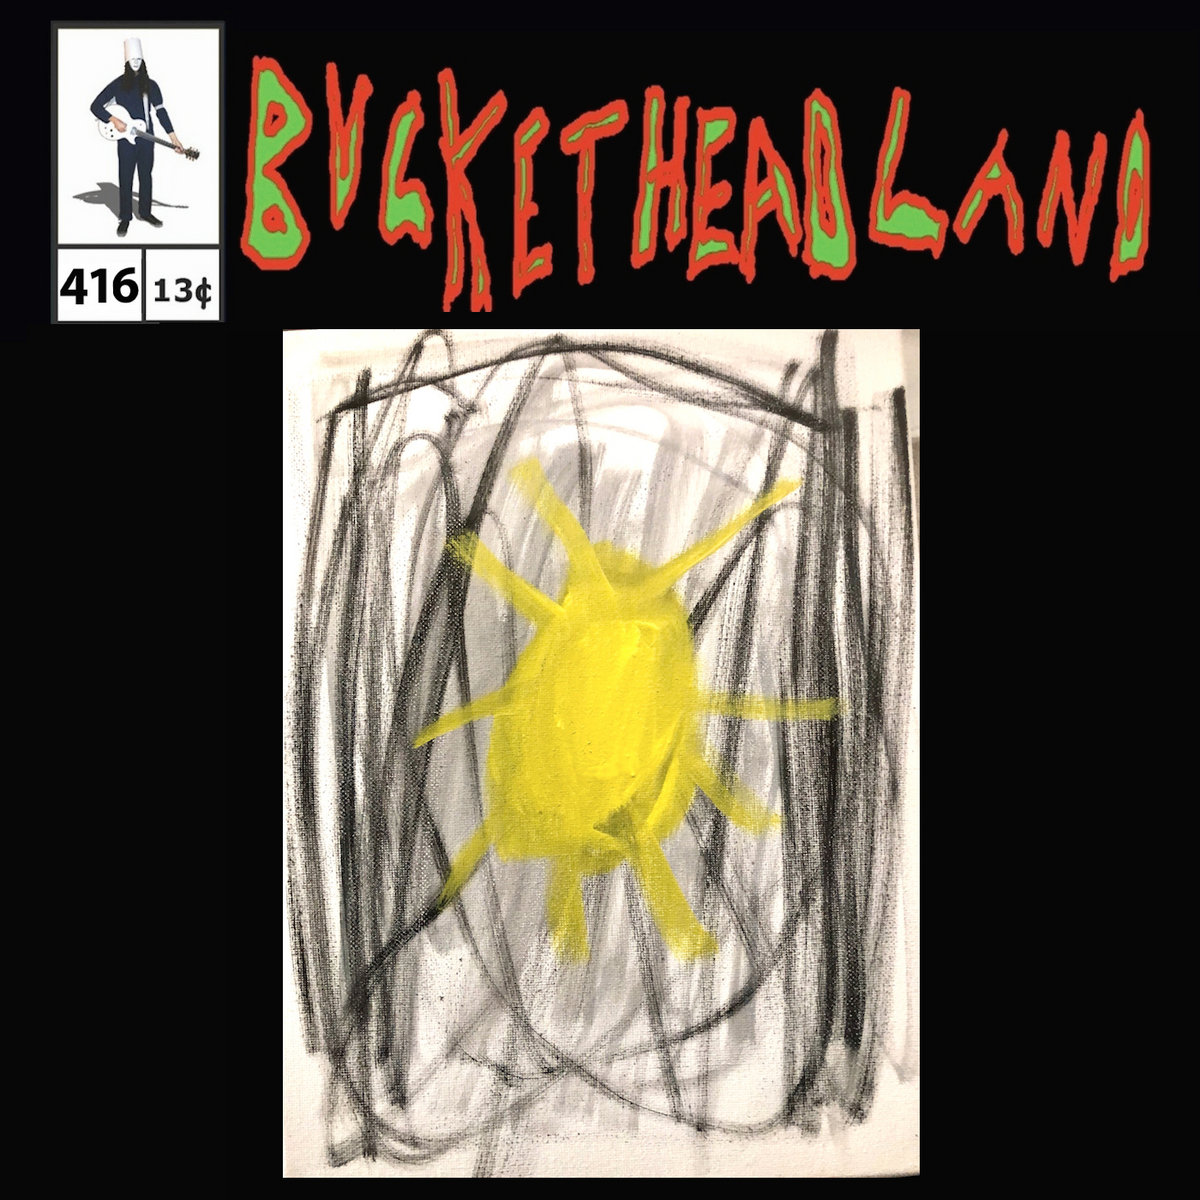 BUCKETHEAD - Pike 416 - That Overcast Day cover 